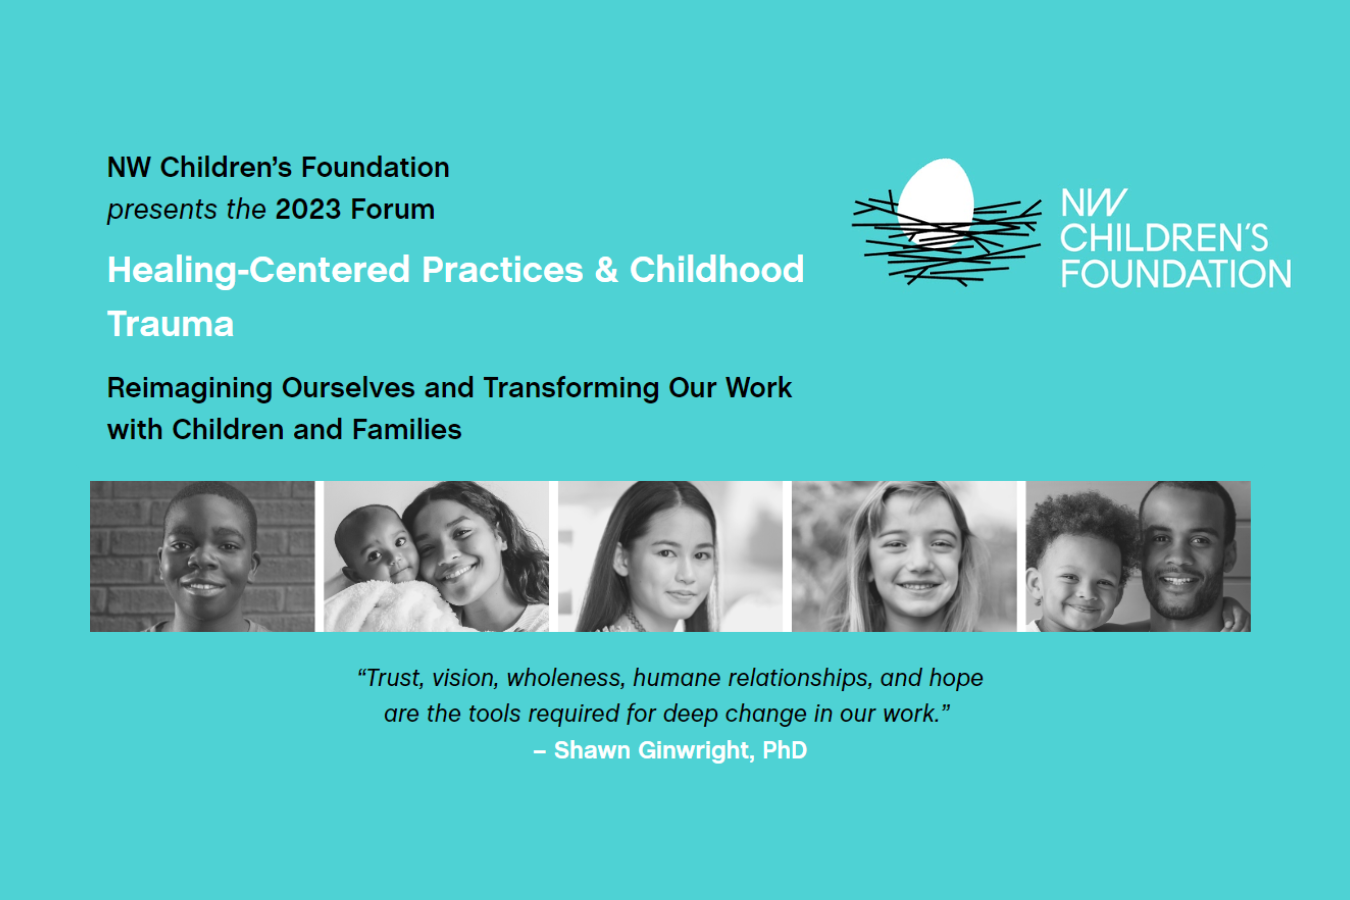 Light blue background. Title on top left "NW Children's Foundation presents our 2023 Forum" with NW children's Foundation logo top right. Centered in the middle says "Healing-Centered Practices & Childhood Trauma" with the date, time and photos of kids.